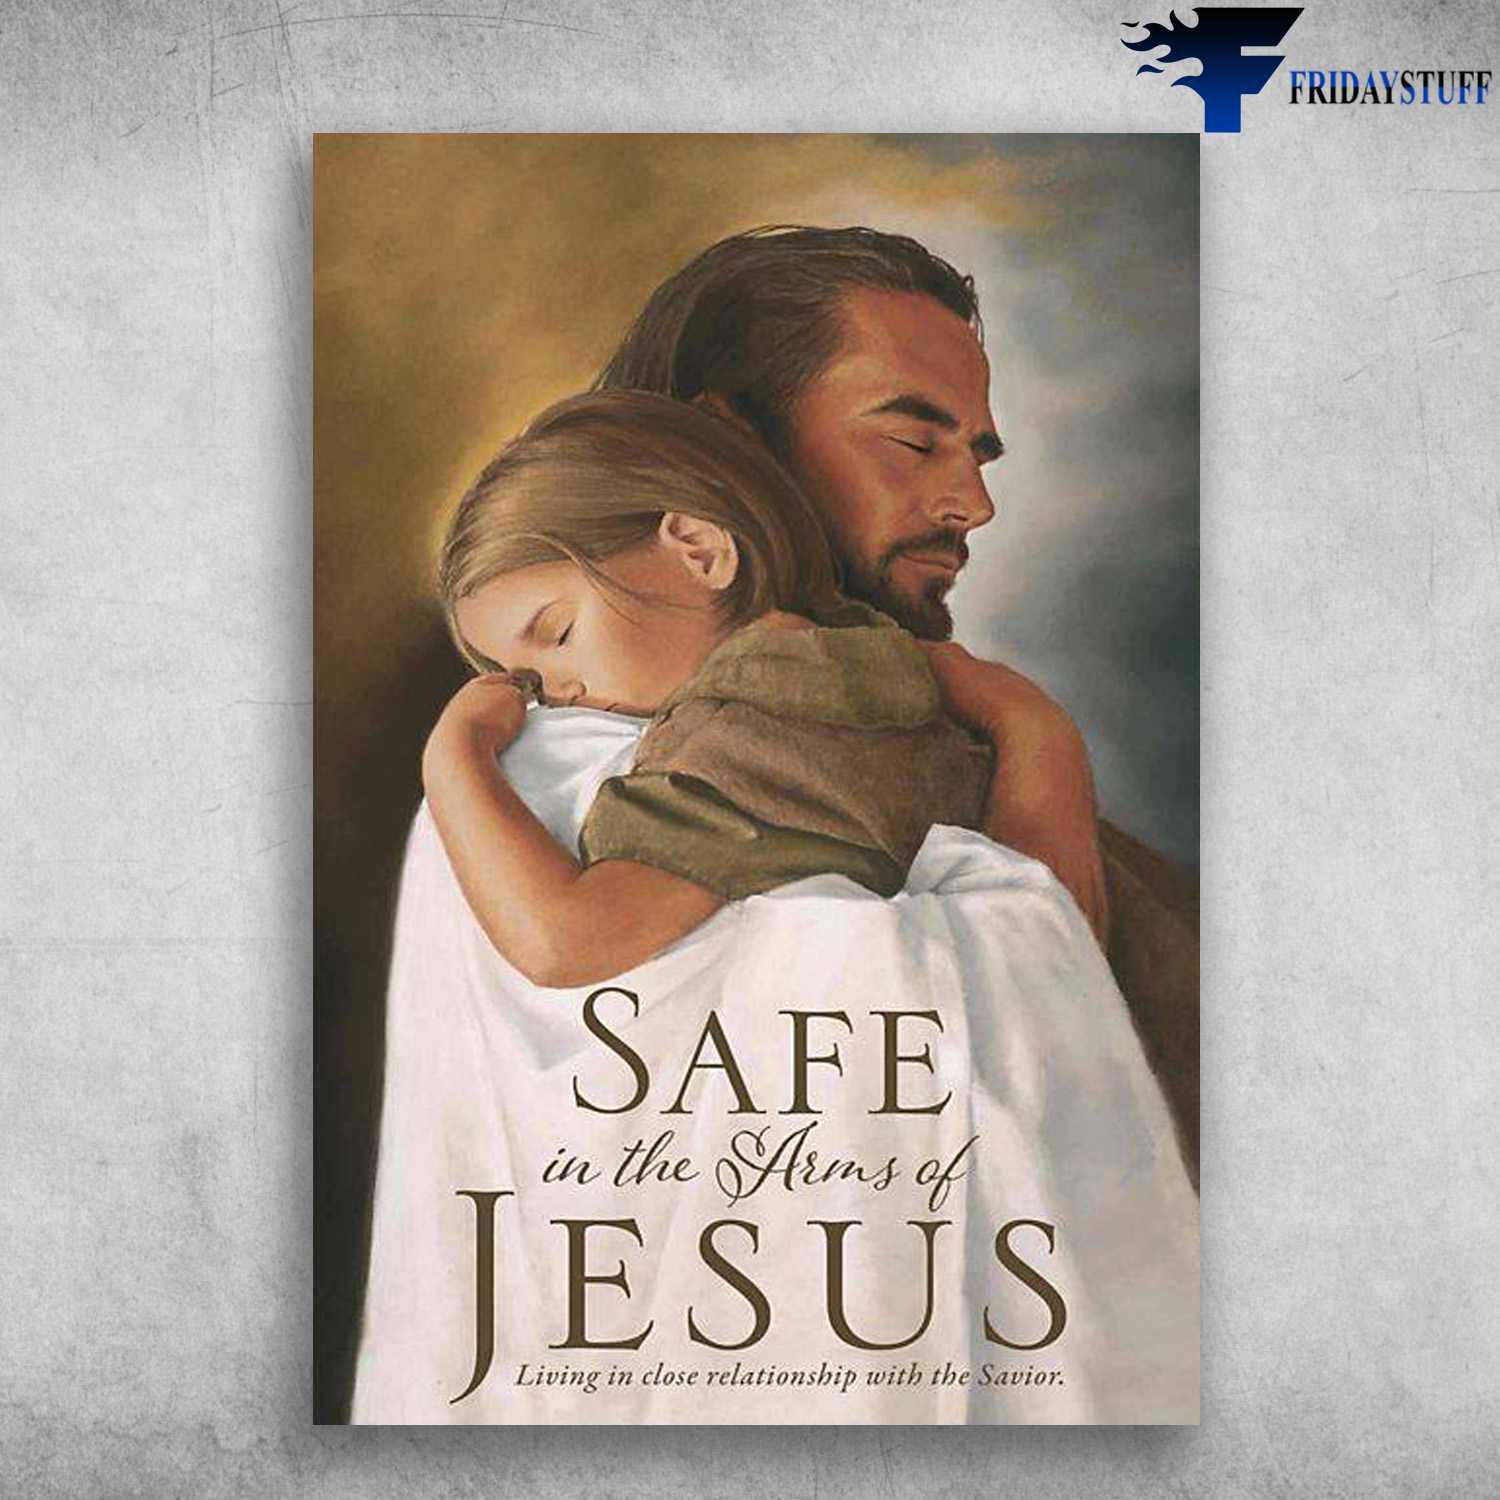 Little Girl And God - Safe In The Arms Of Jesus, Living In Close Relationship, With The Savior